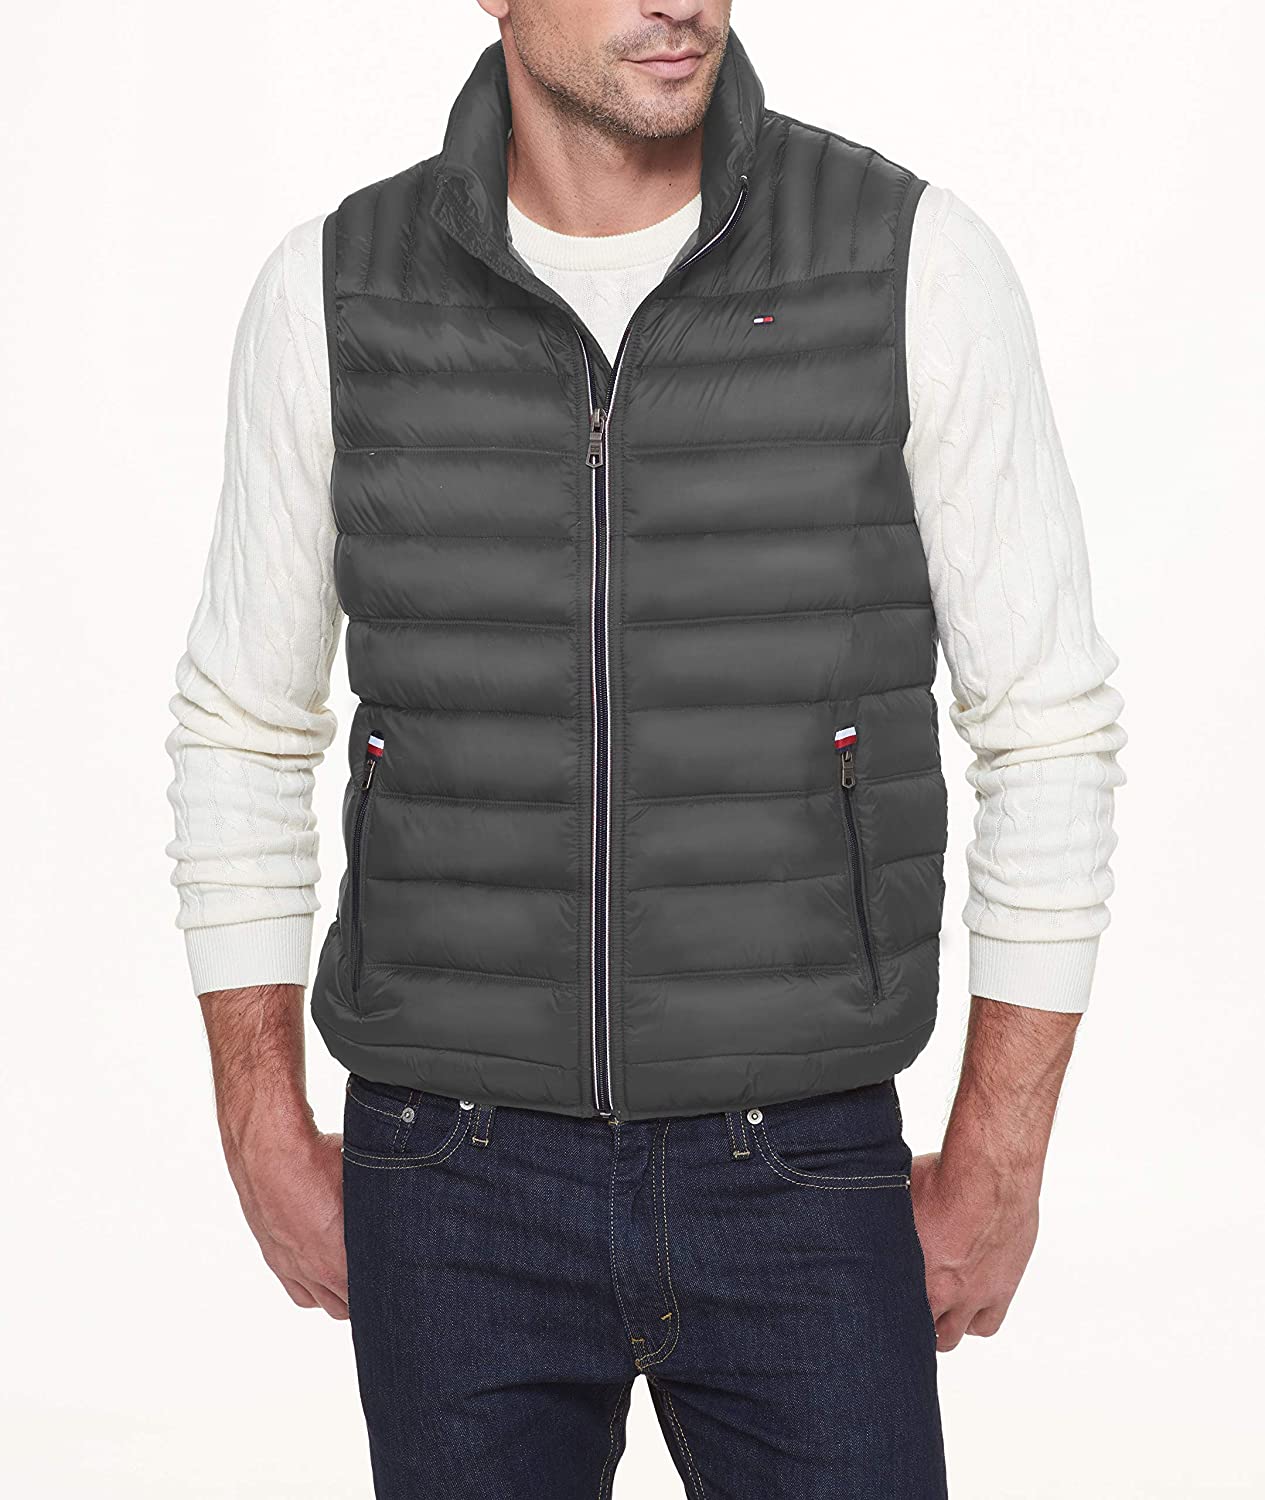 mens casual vest outfits